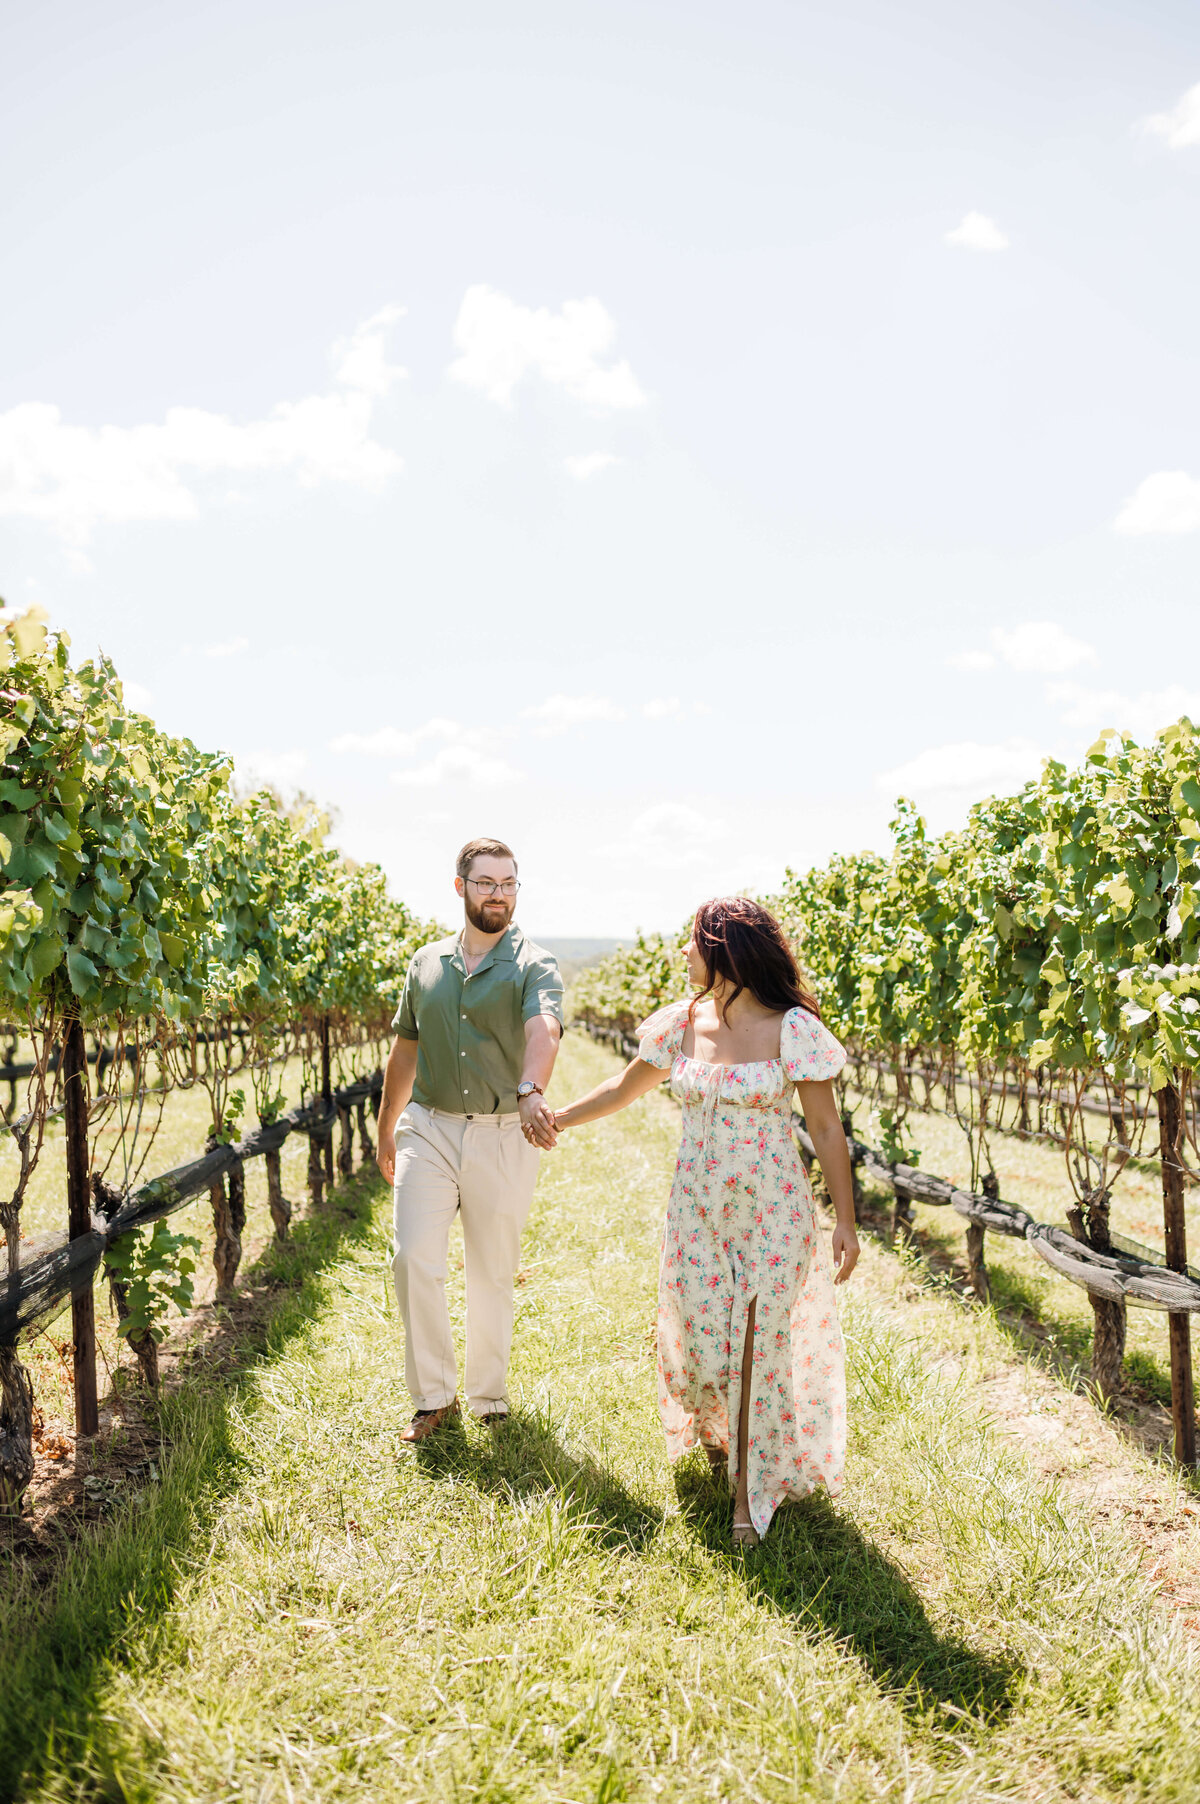 stone tower winery wedding venue with woman and man holding hands and running together down a row of lawn in between grape vines